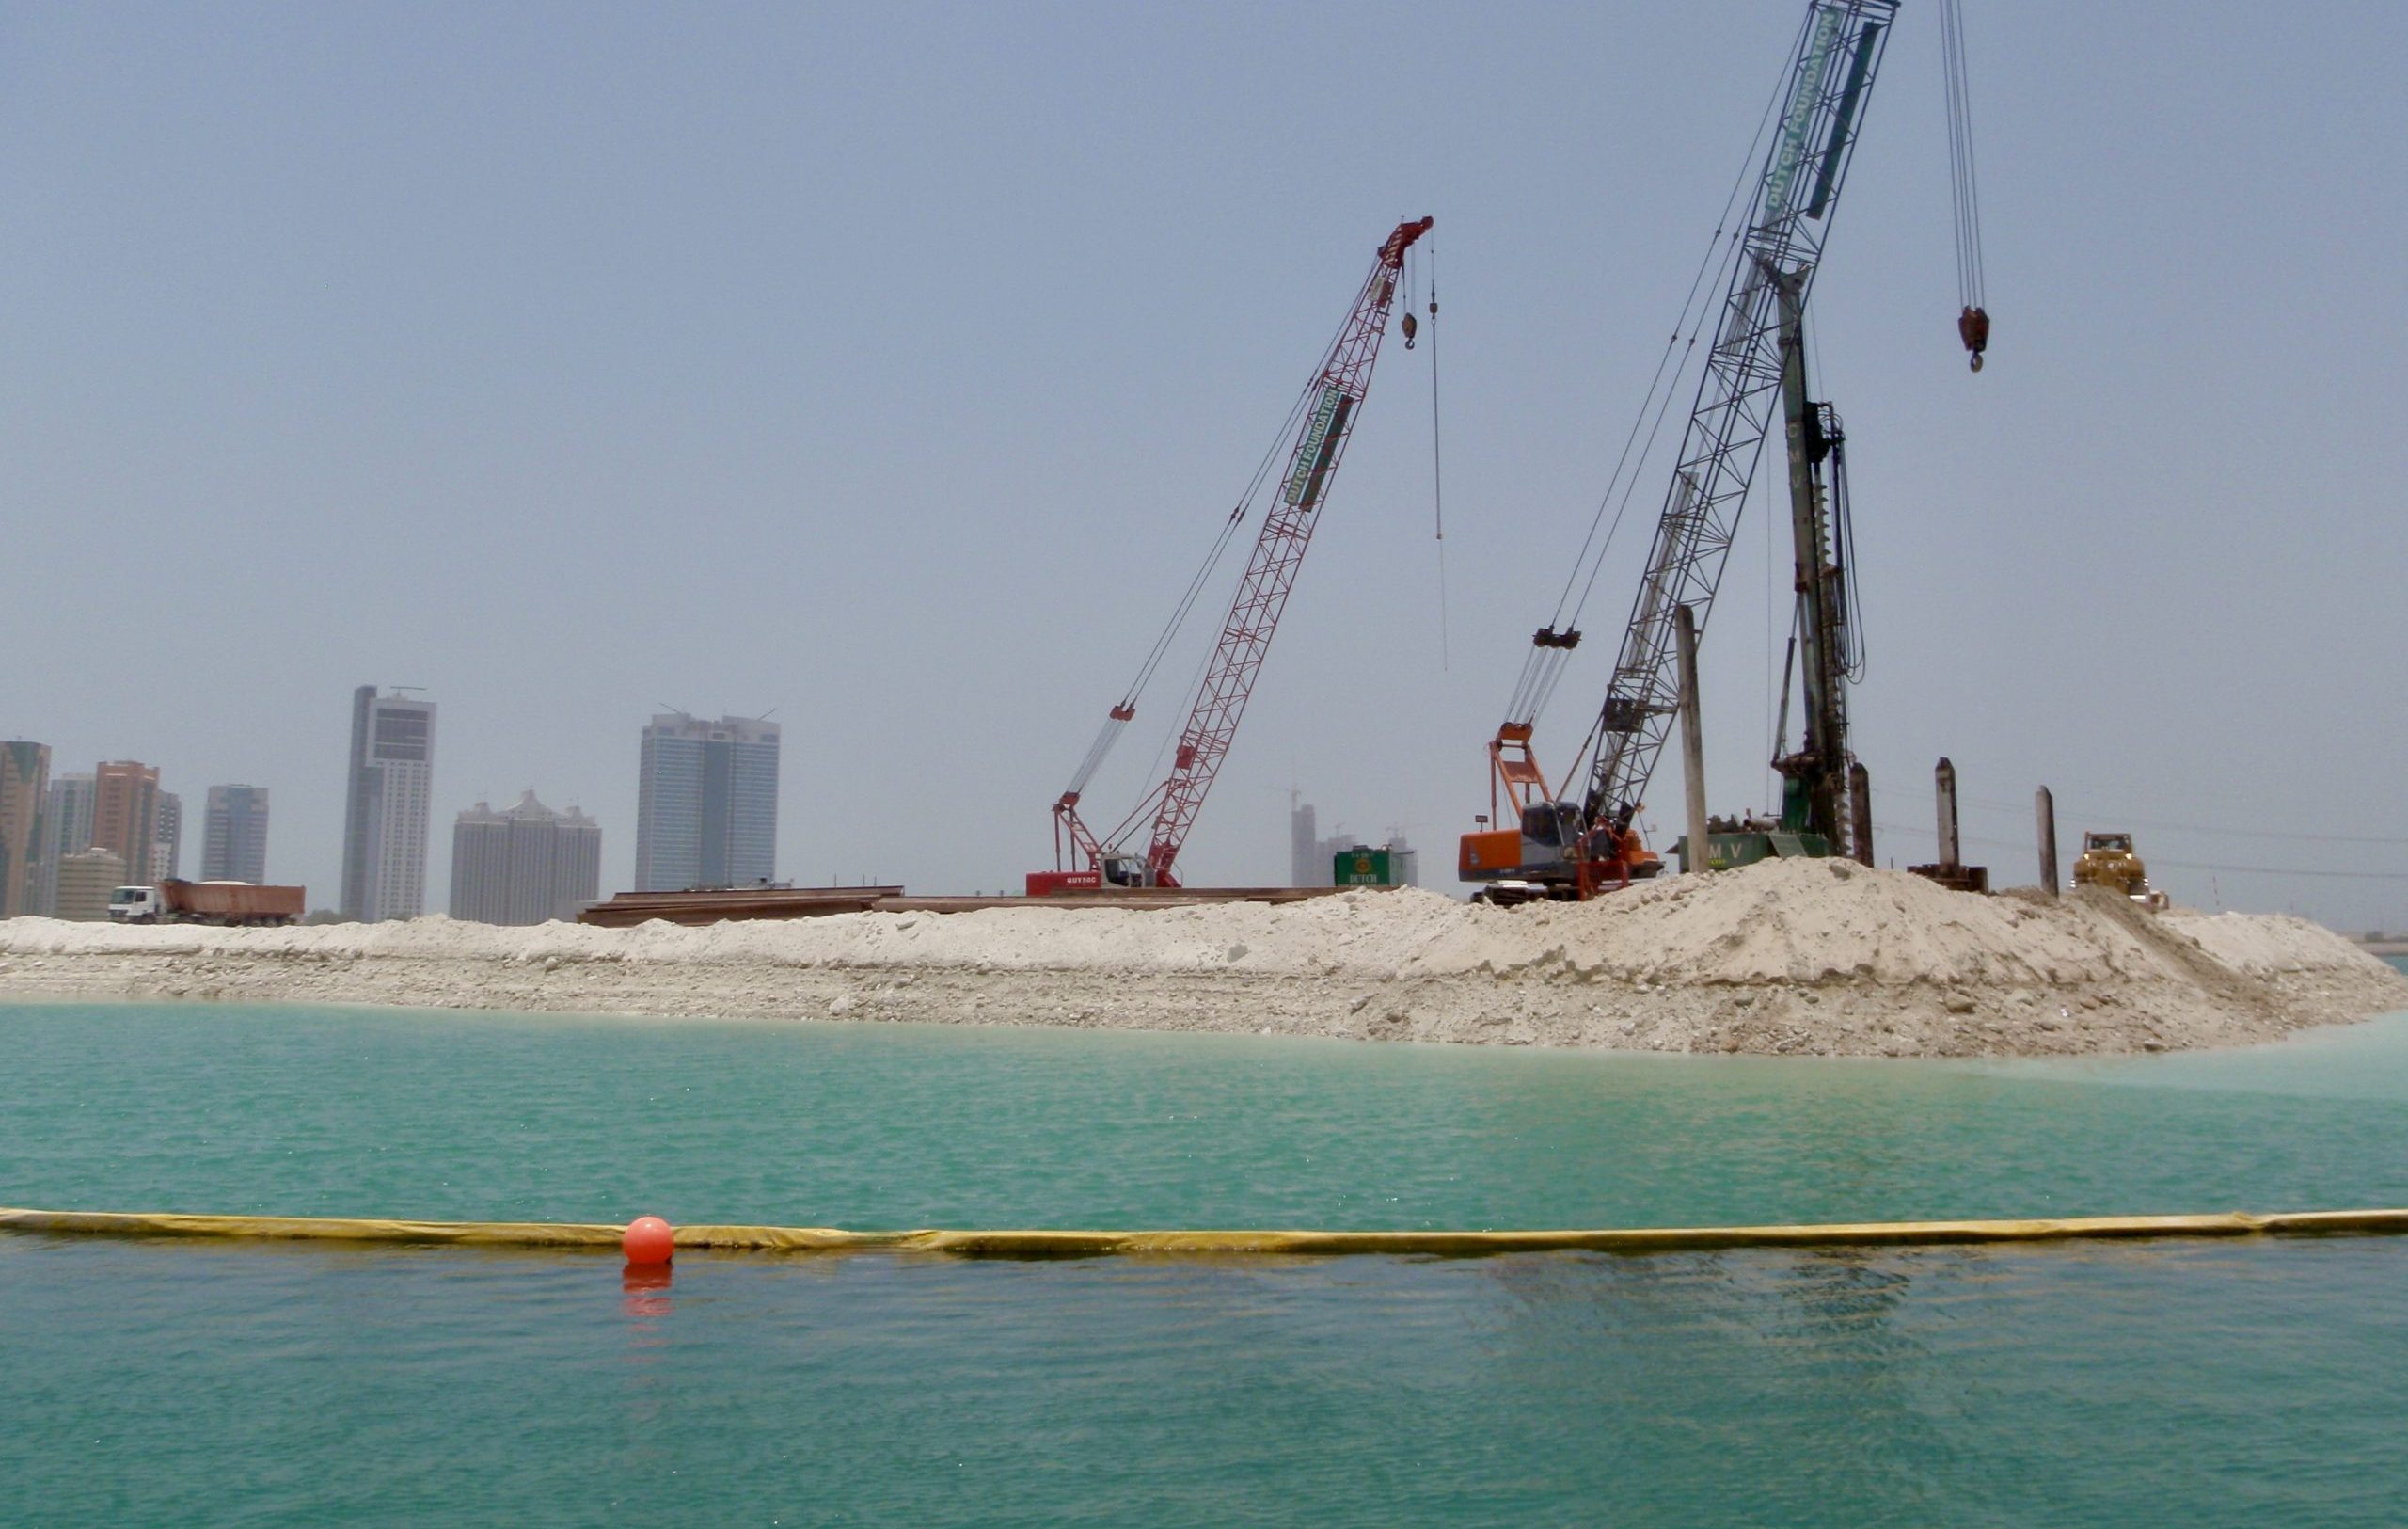 Egypt's dredging plans come with environmental risks